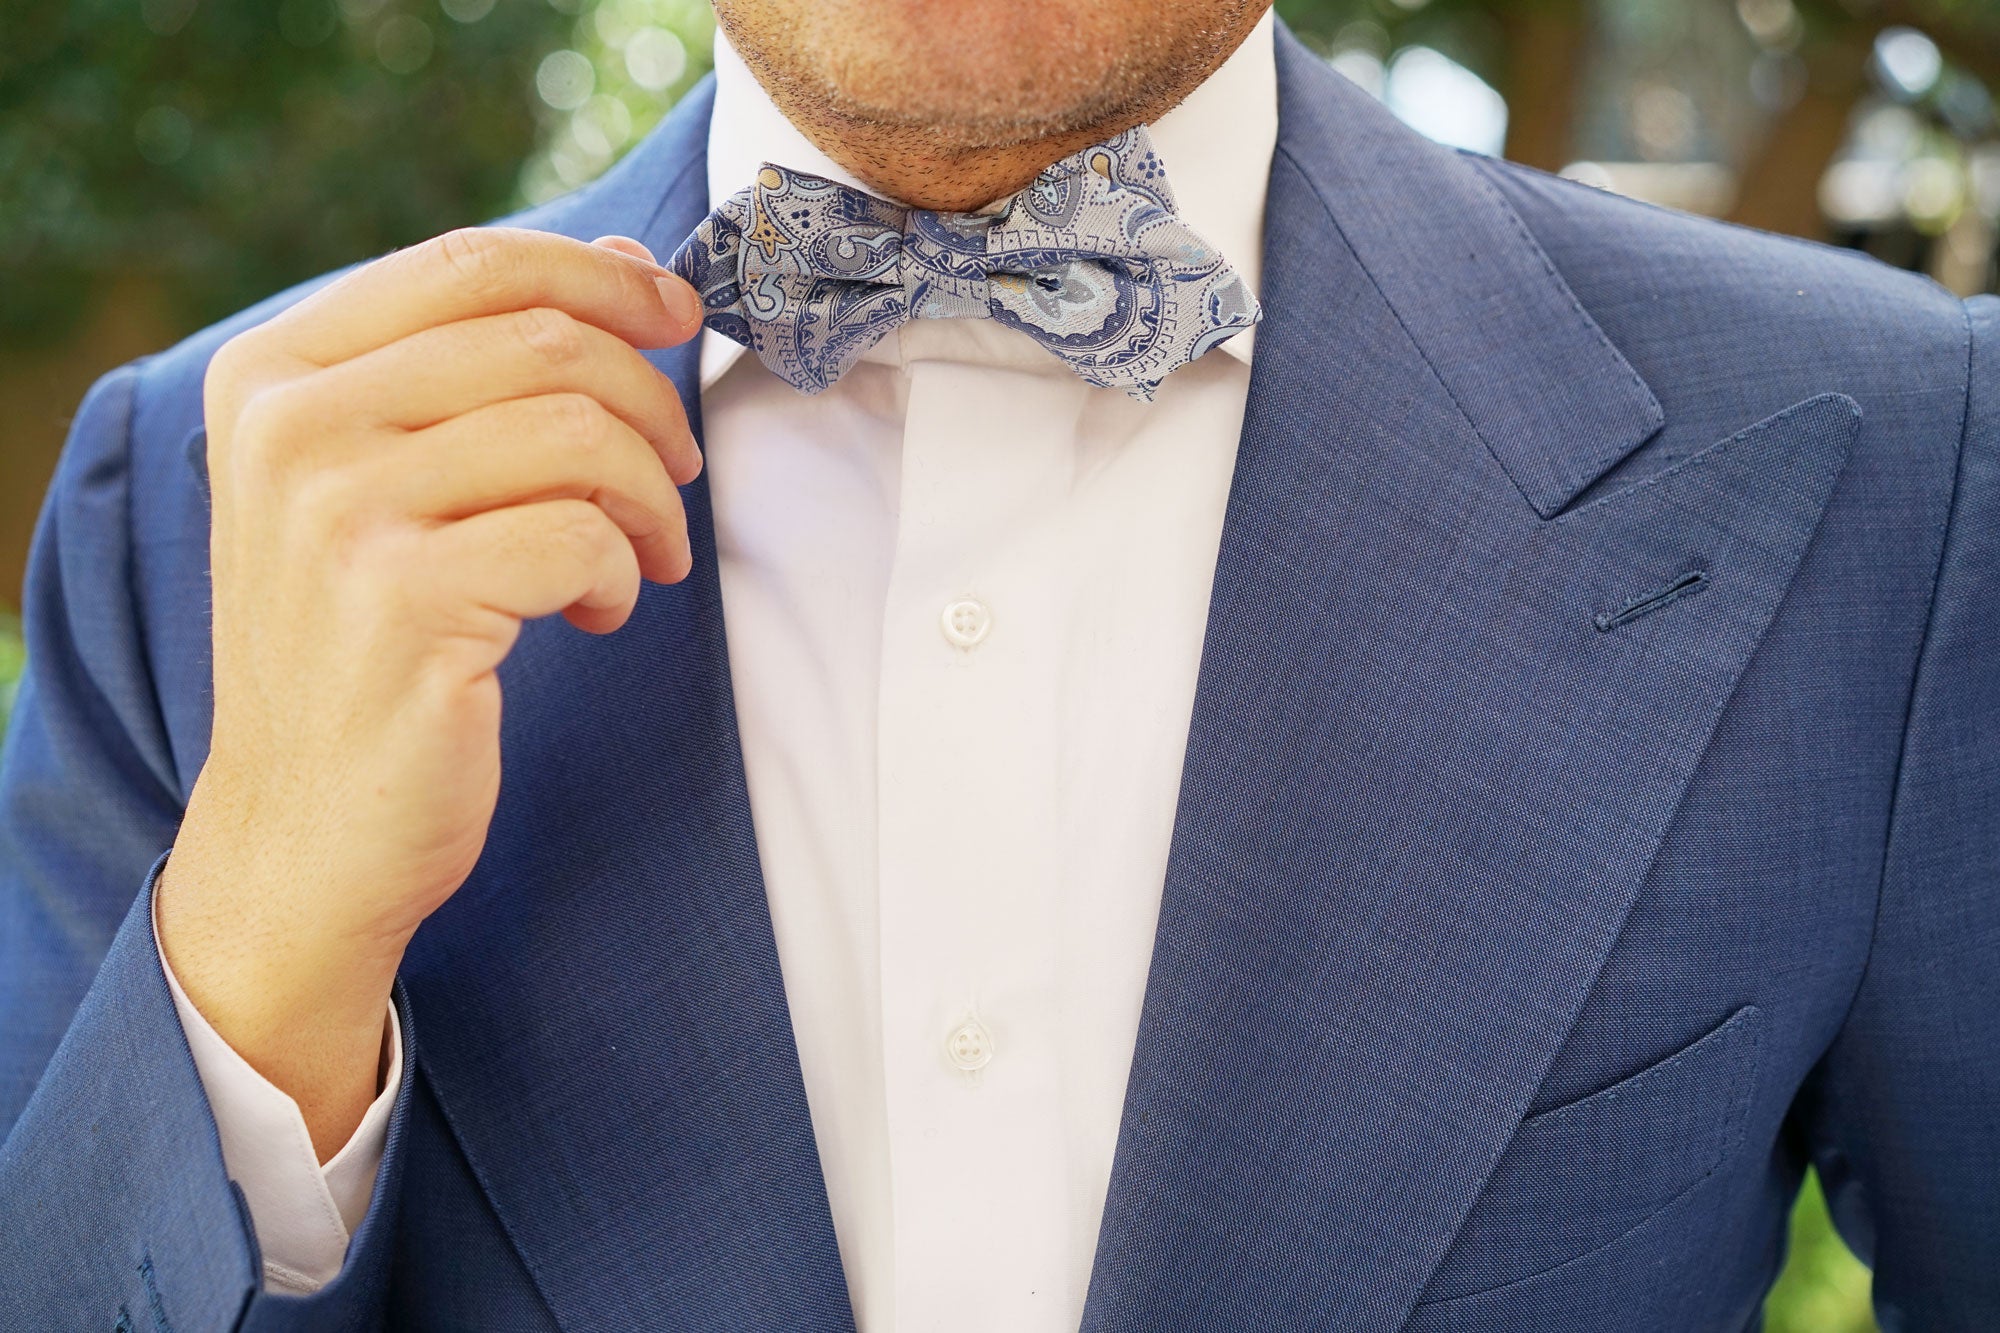 Paisley Silver Bow Tie | Light Blue Patterned Bowtie | Luxury Bow Ties - Paisley Silver Bow Tie with Light Blue Silver